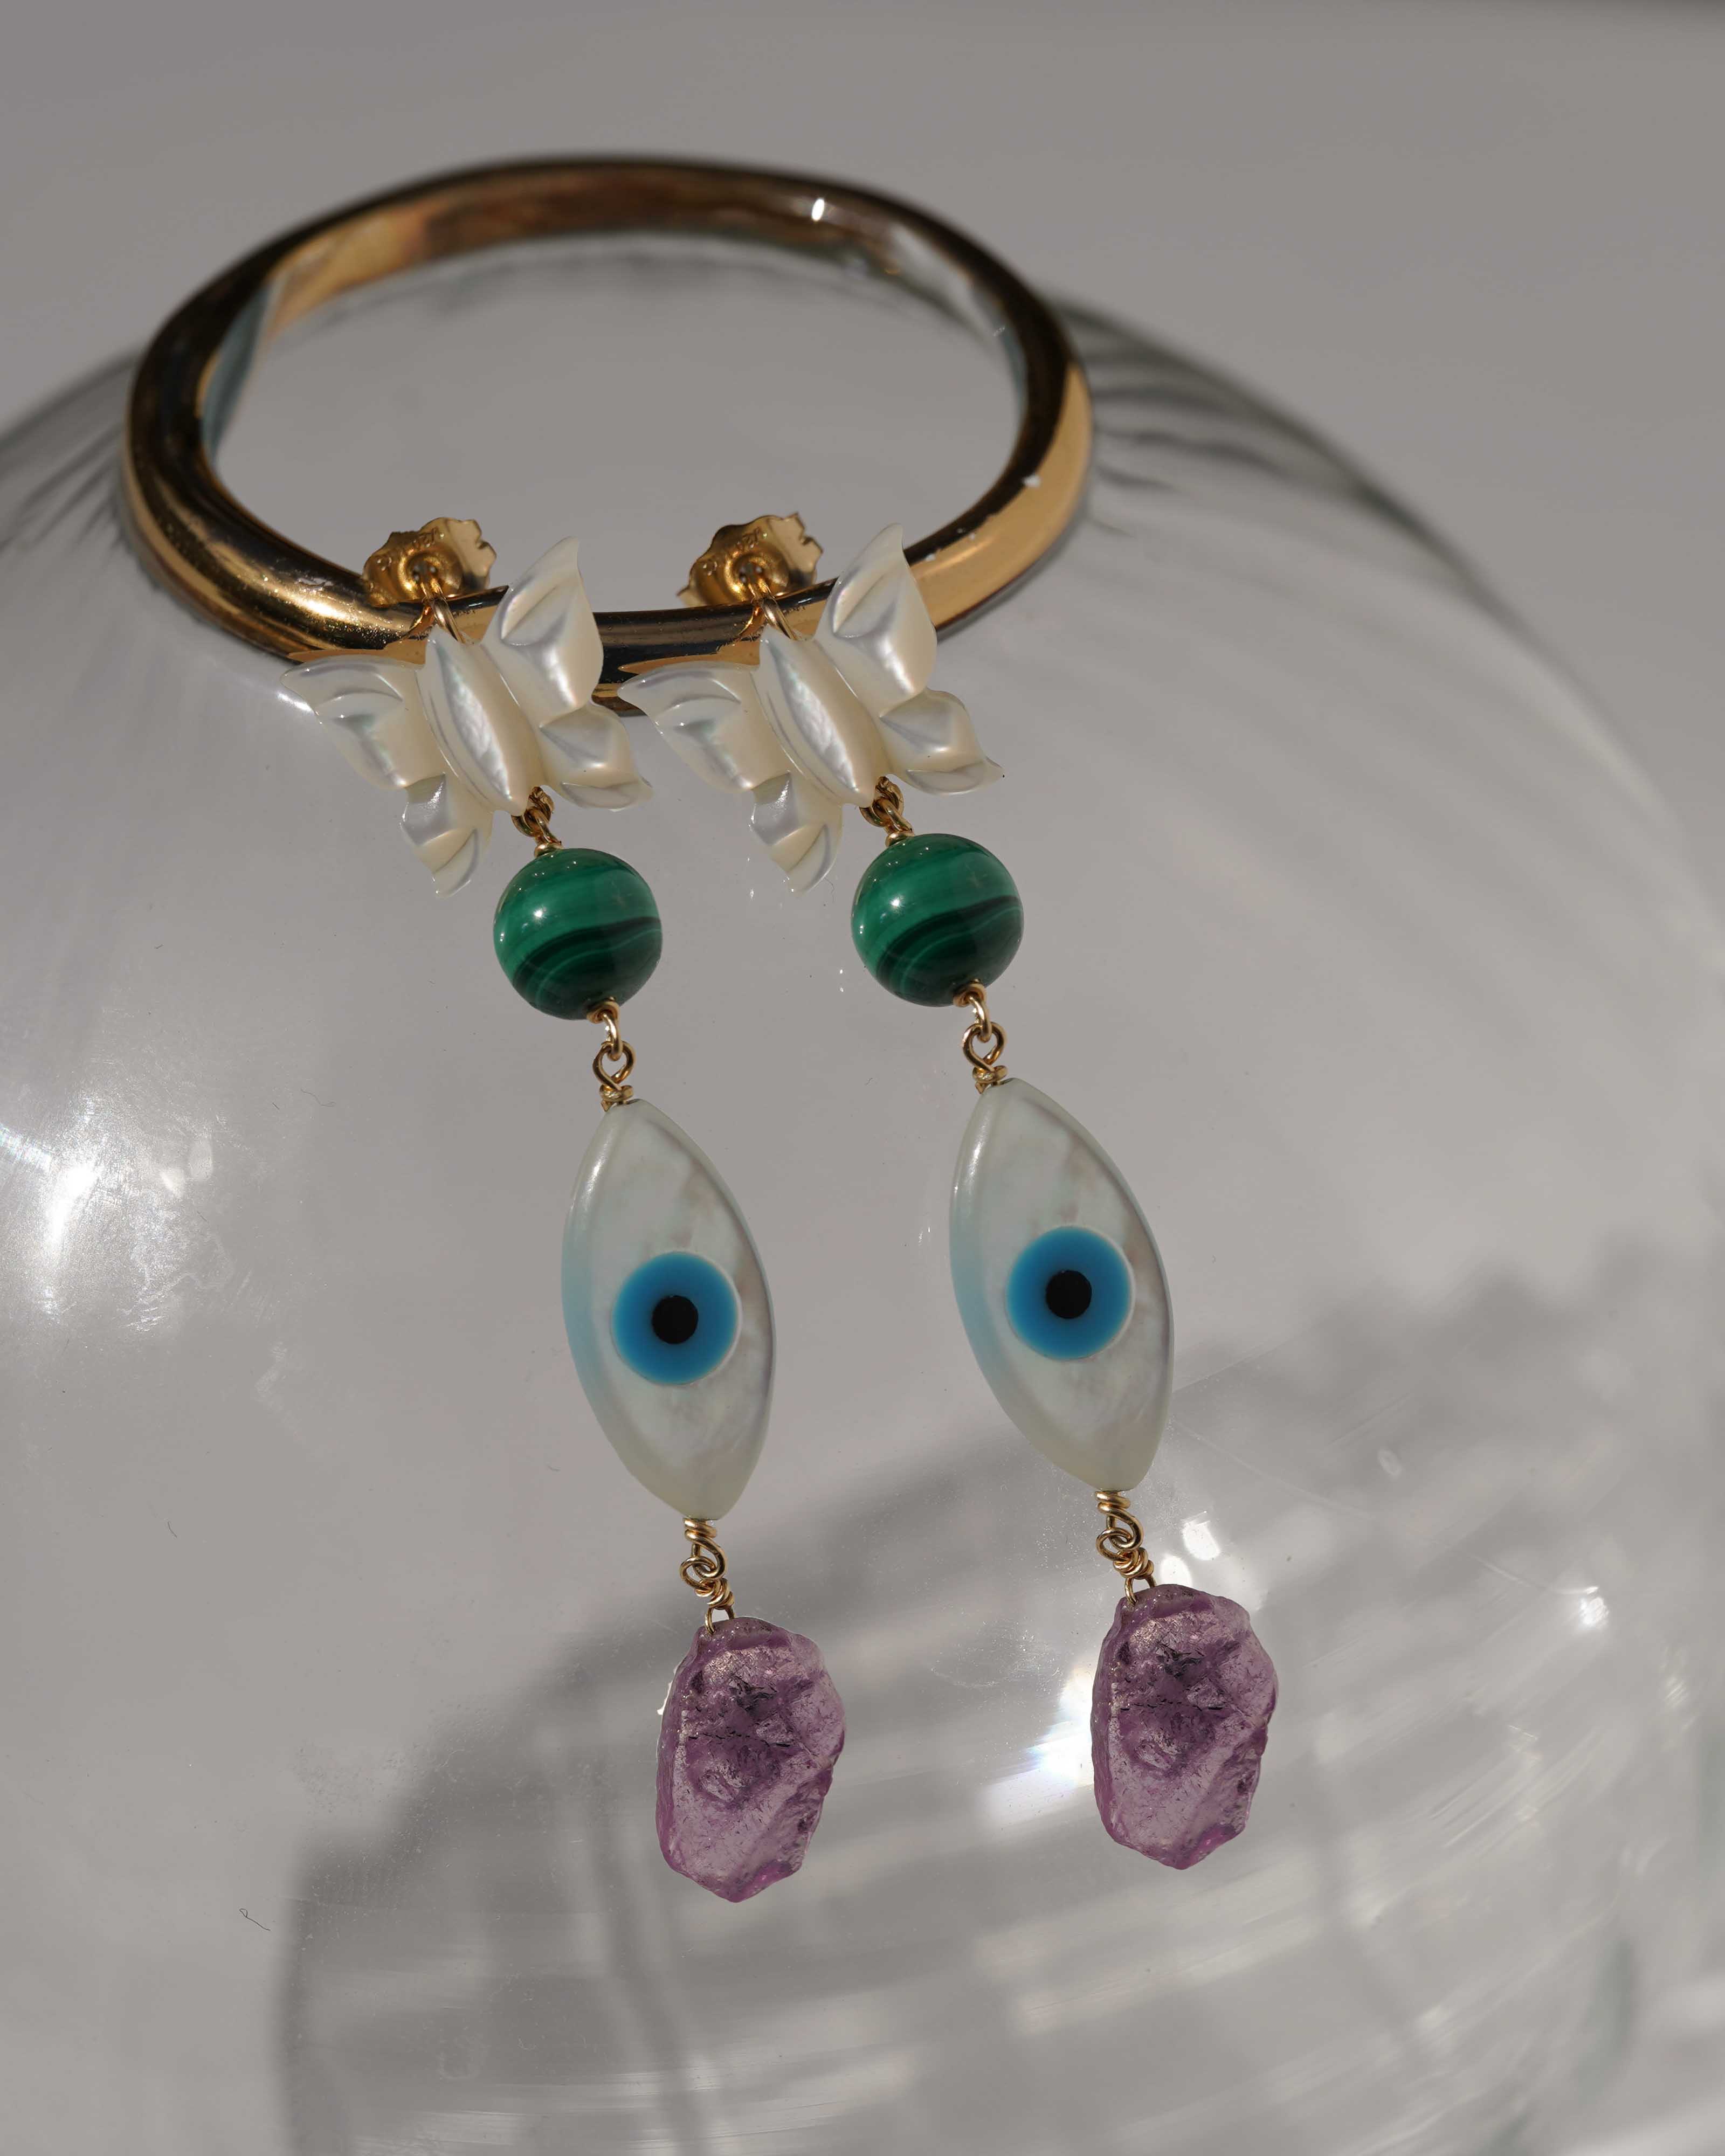 Dulce Earrings by KOZAKH. 3 inch drop dangling earrings, crafted in 14K Gold Filled, featuring a Mother of Pearl Butterfly charm, a round cut Malachite, a hand-carved Mother of Pearl eye charm, and a Pink Tourmaline shard.